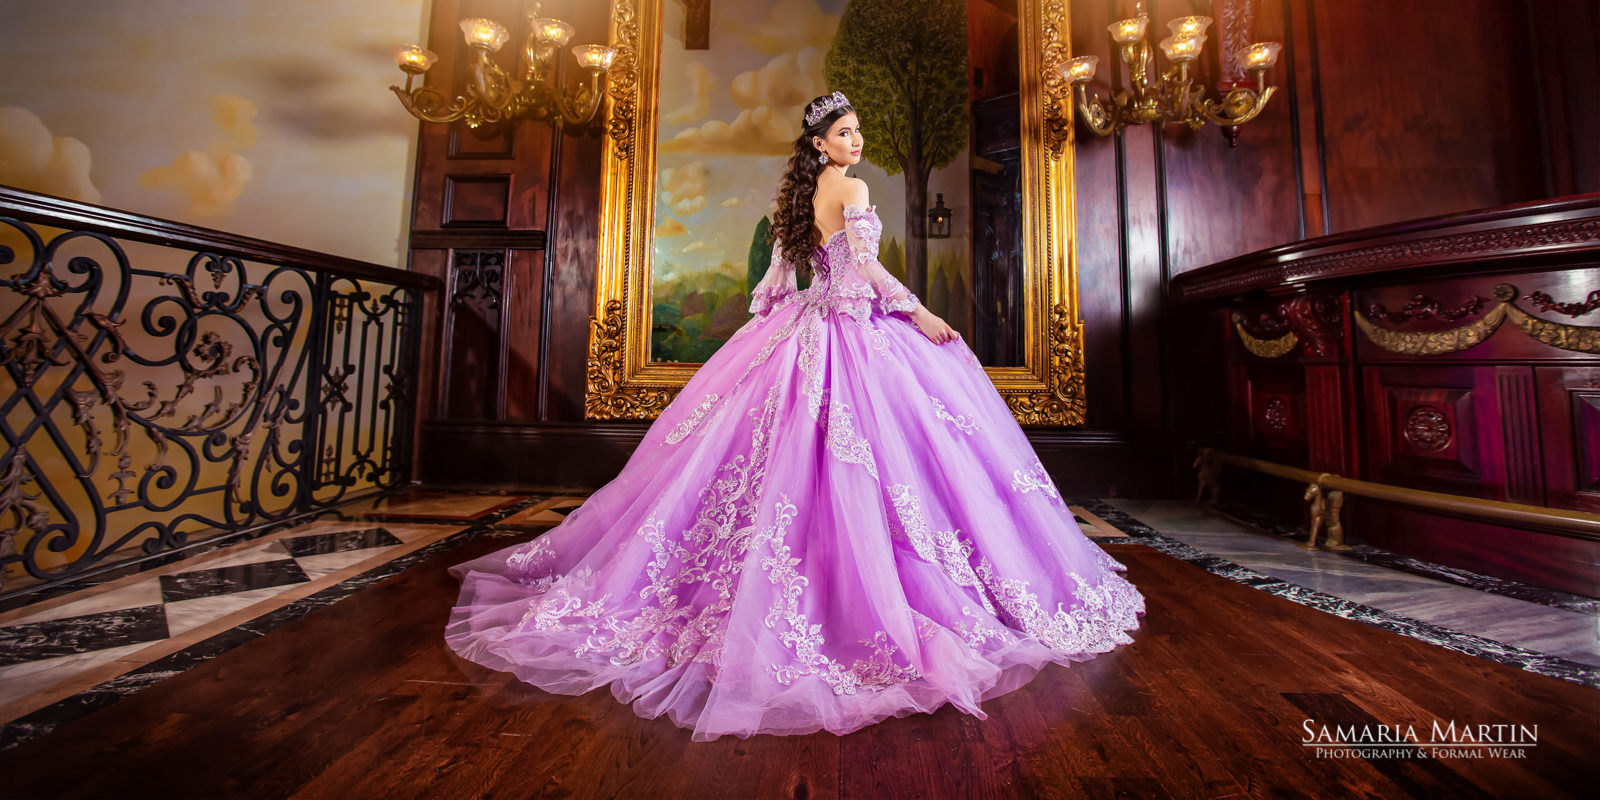 Fashion photoshoot, best quinceanera pictures in Miami, Samaria Martin Photographer, where to rent quinceanera dresses, quinceanera collection 6